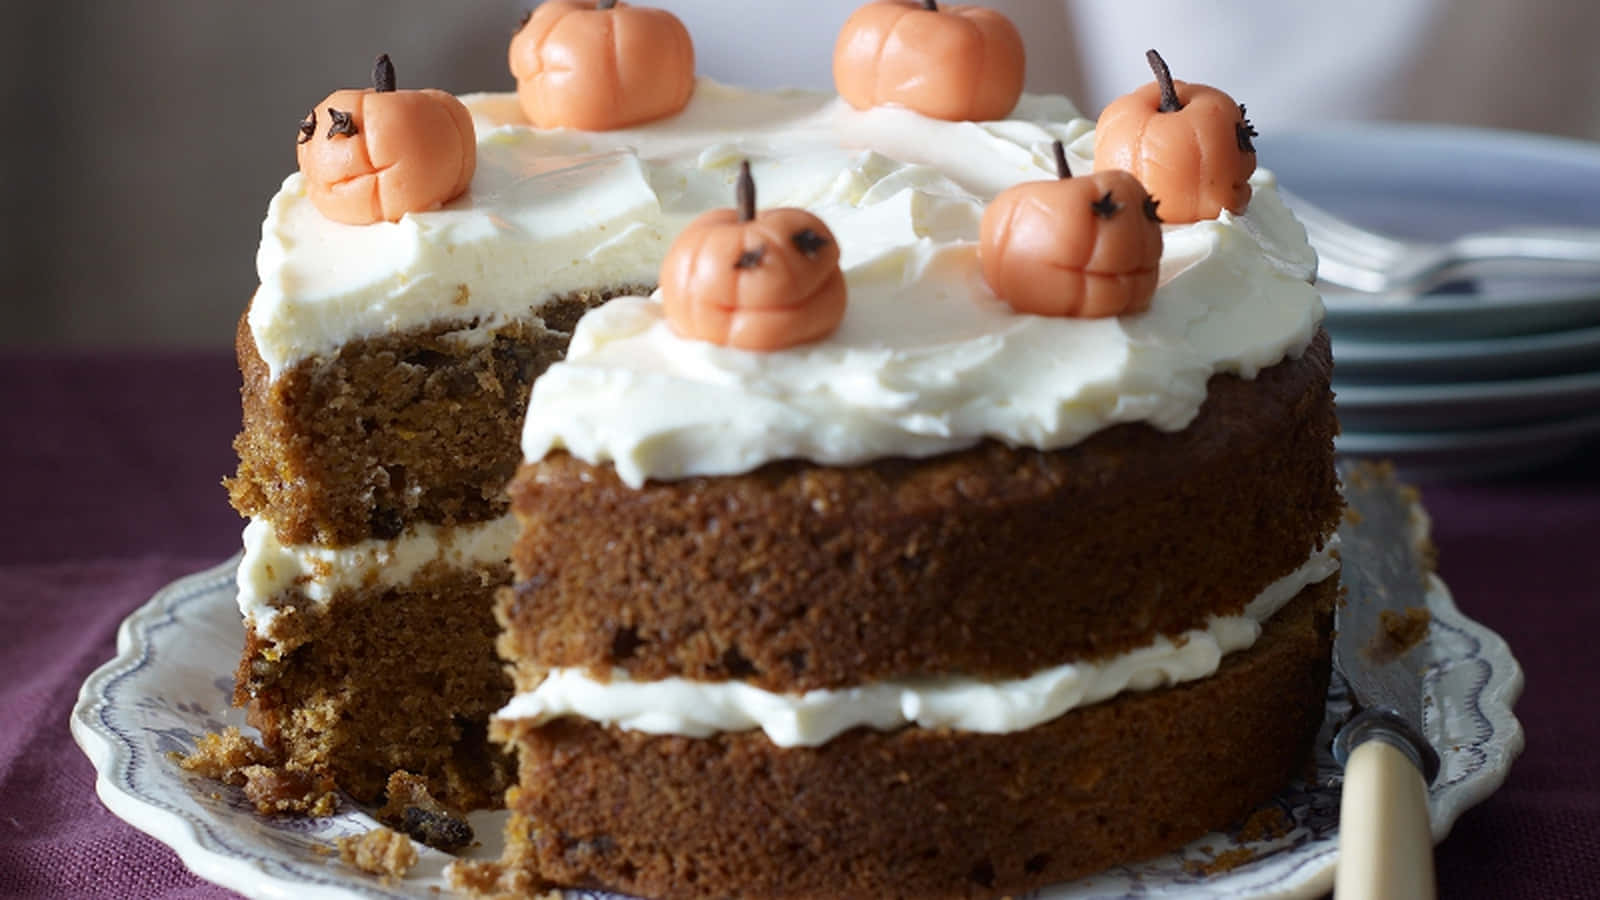 Delicious Halloween Cake with Pumpkins and Chocolate Wallpaper